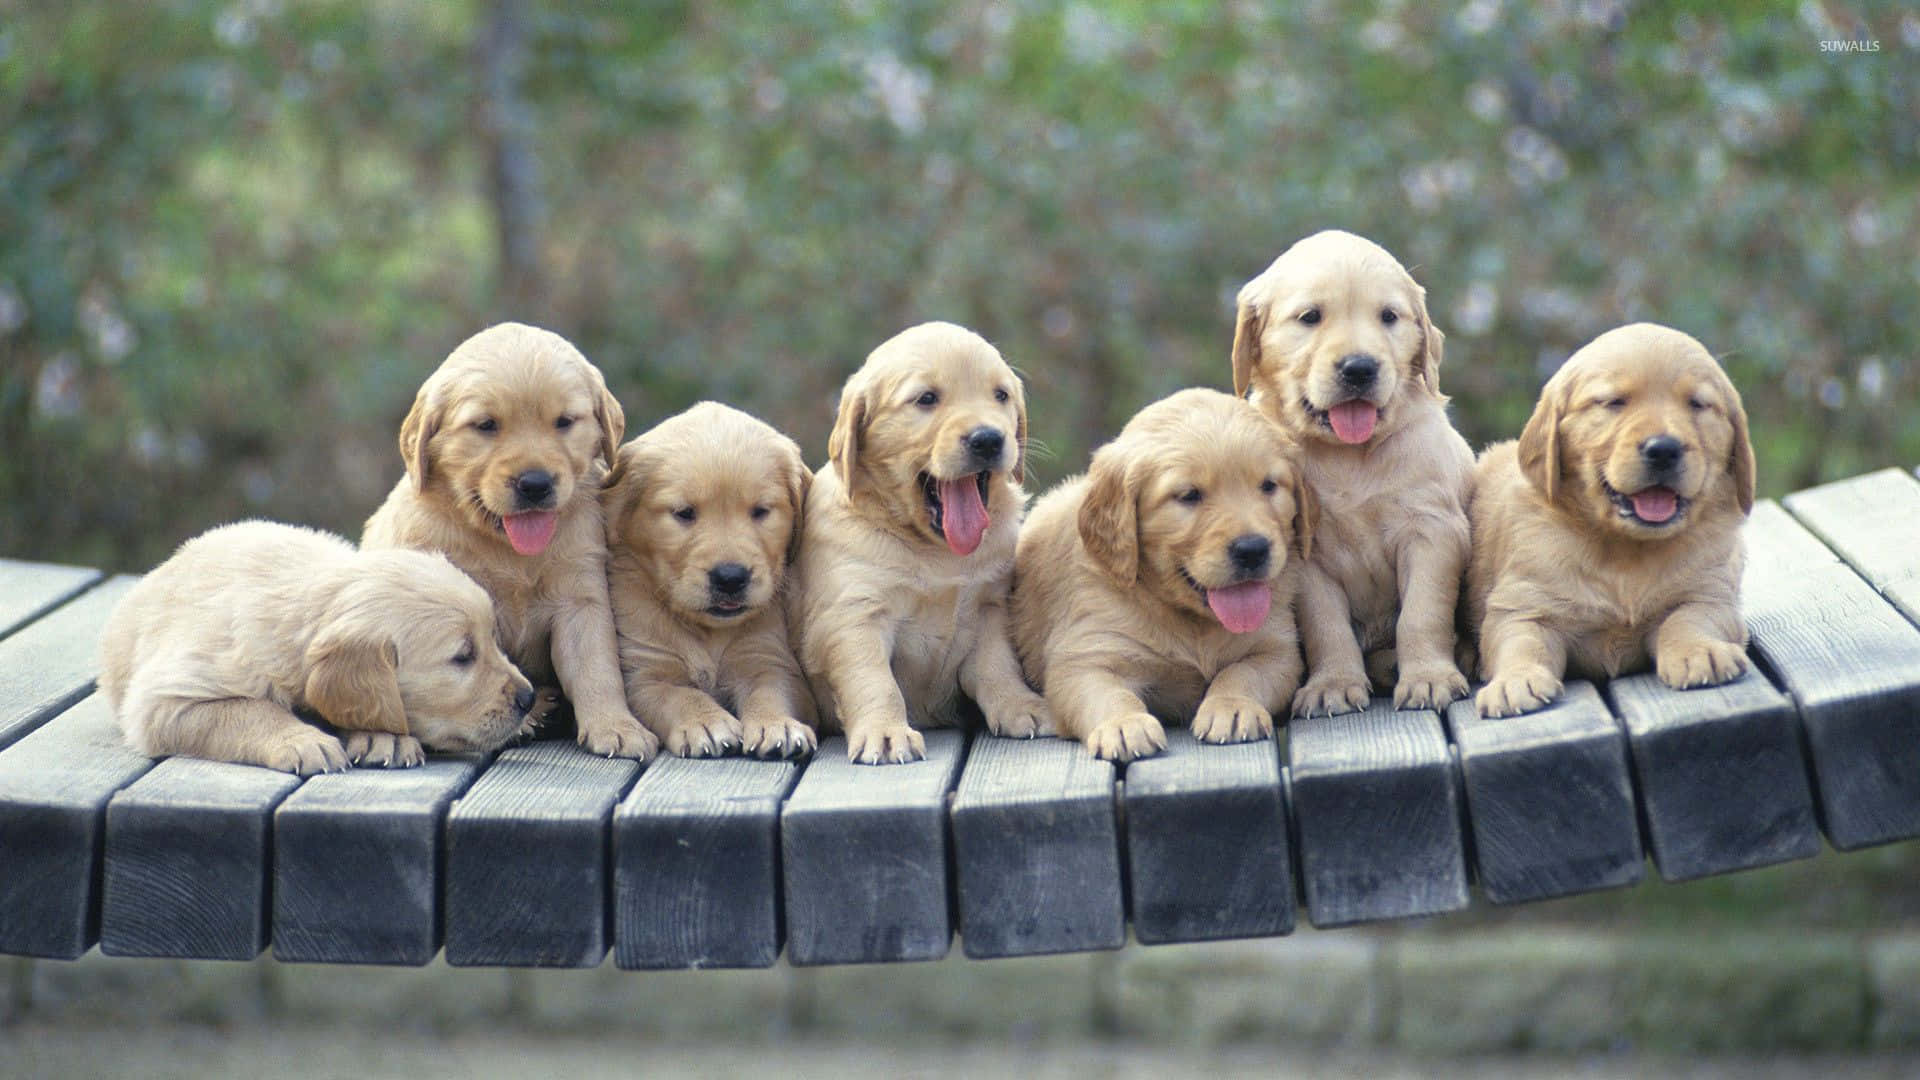 Explore The World With This Golden Retriever Puppy